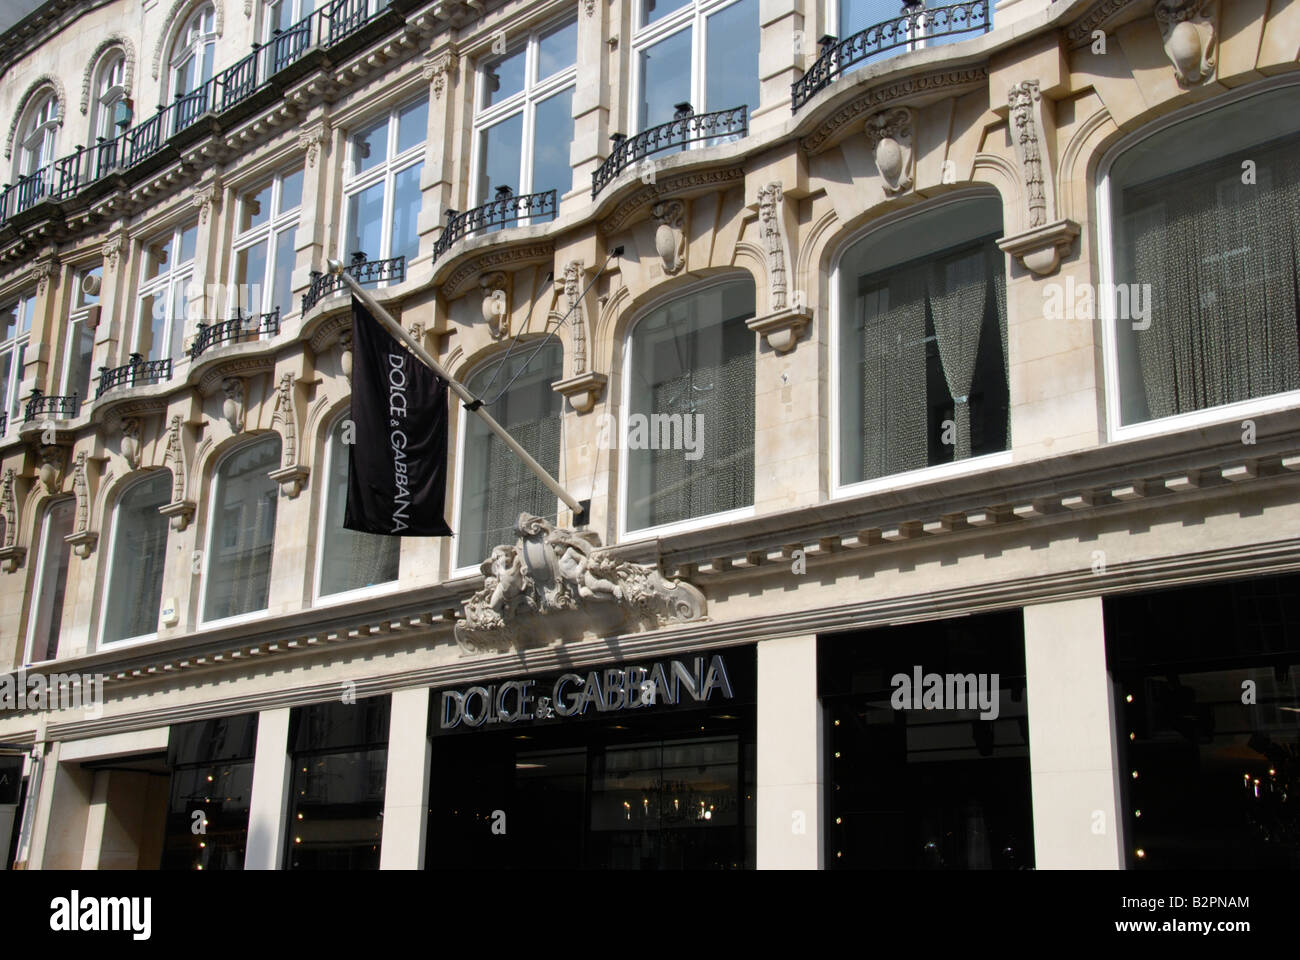 Dolce and Gabbana desiger fashion store in Old Bond Street London England Stock Photo